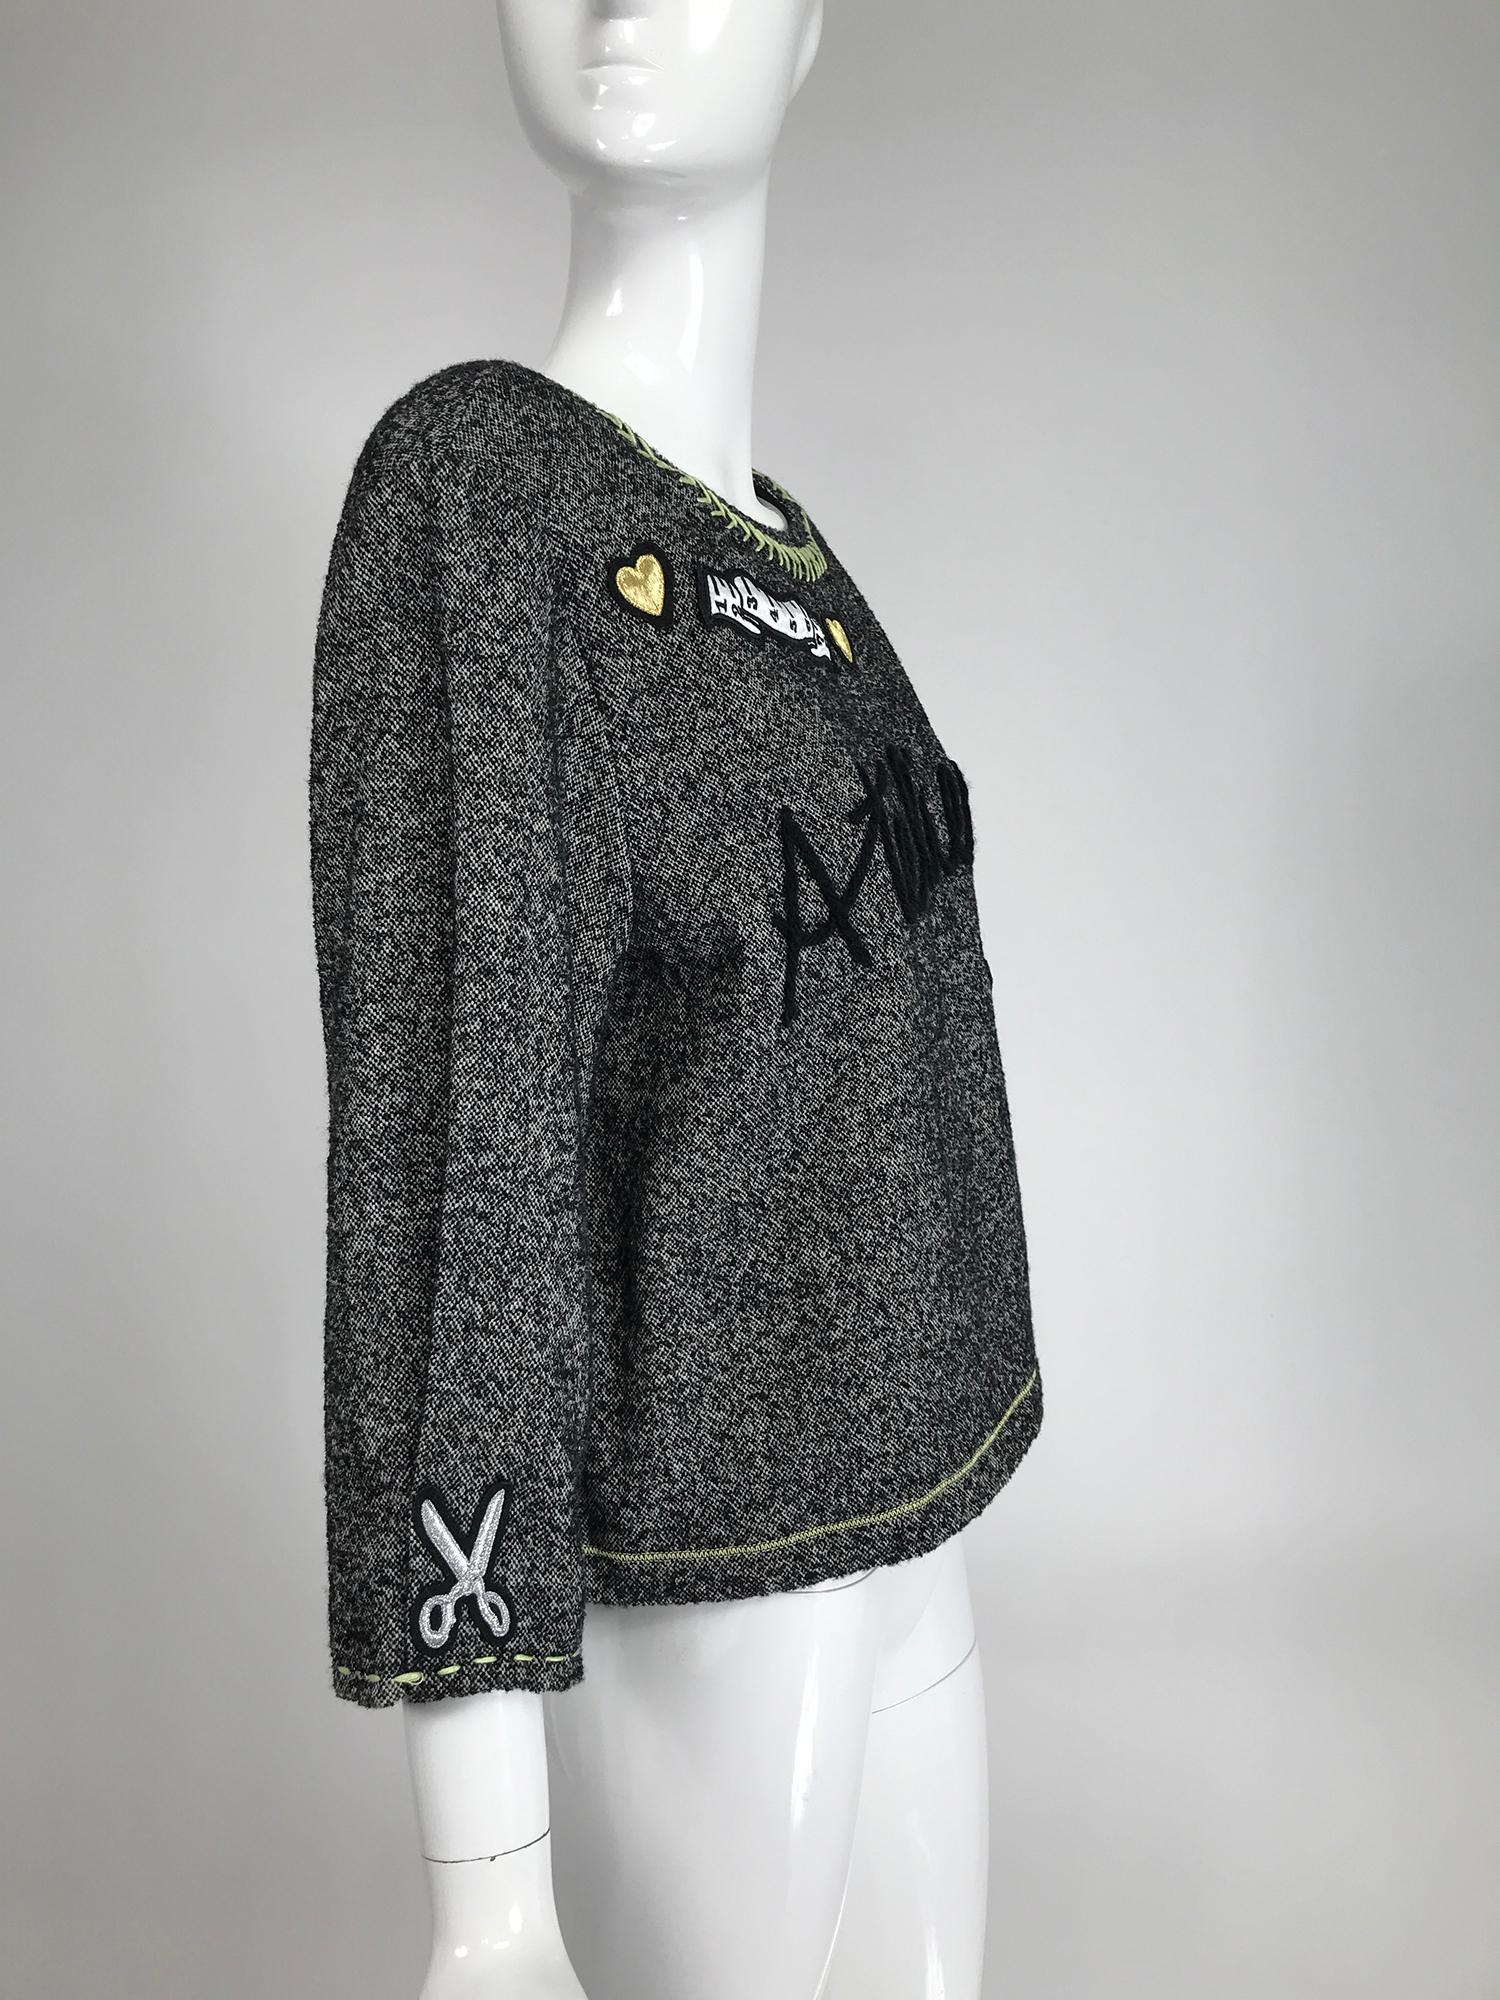 Black Moschino Cheap & Chic Atelier! Tweed Applique Top